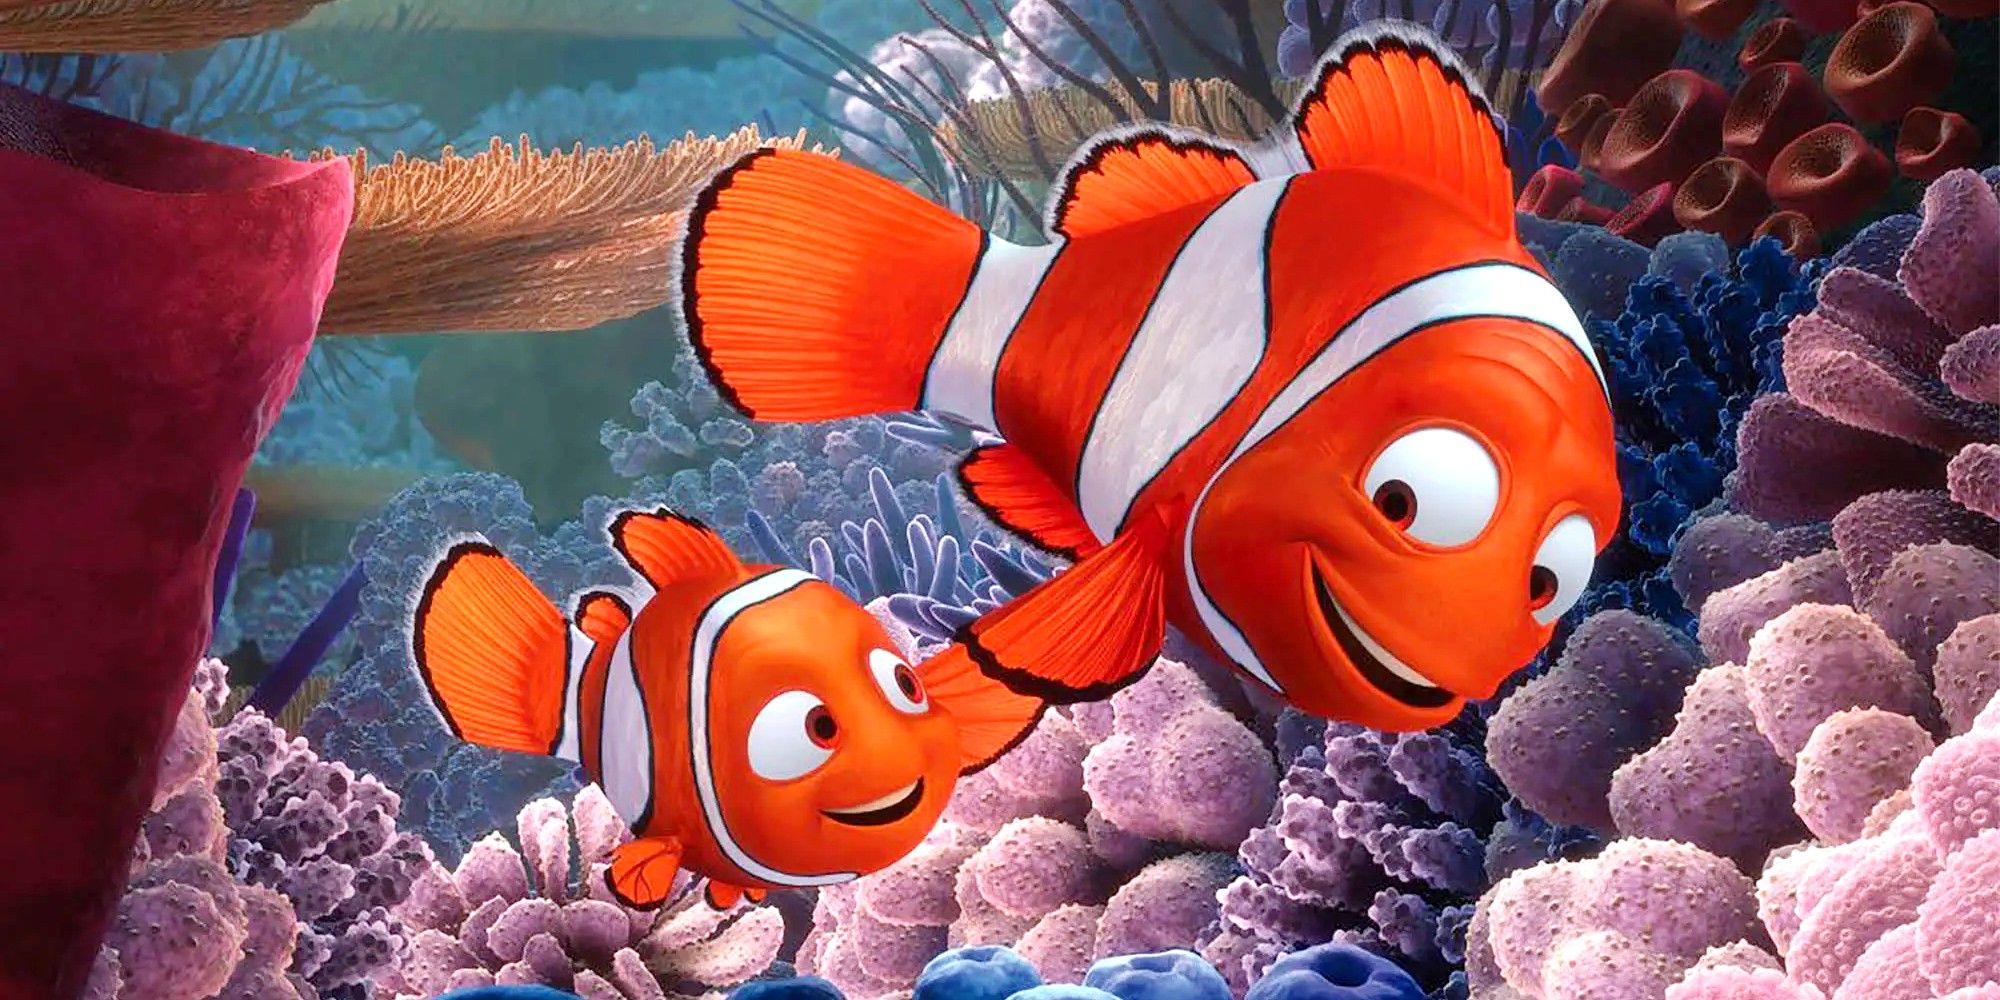 Marlin and Nemo smiling and slapping fins in Finding Nemo